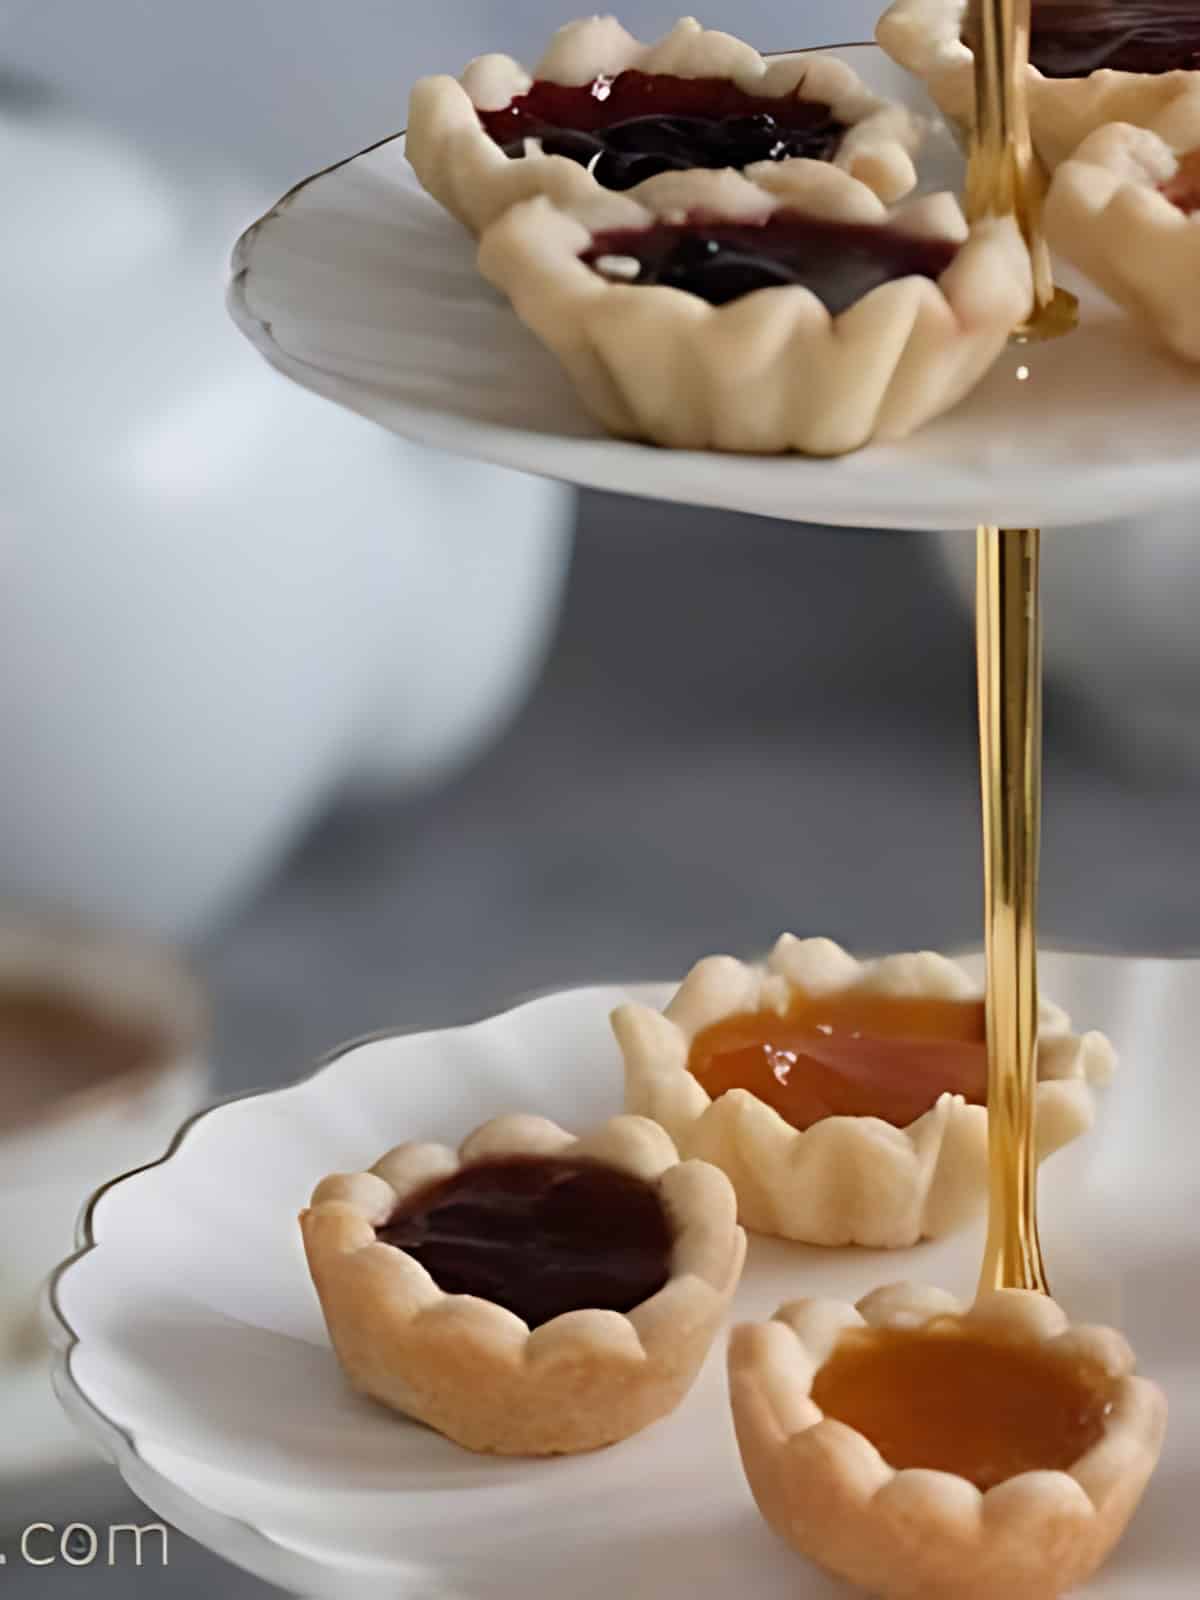 Different flavors of Jam tarts on a plate.